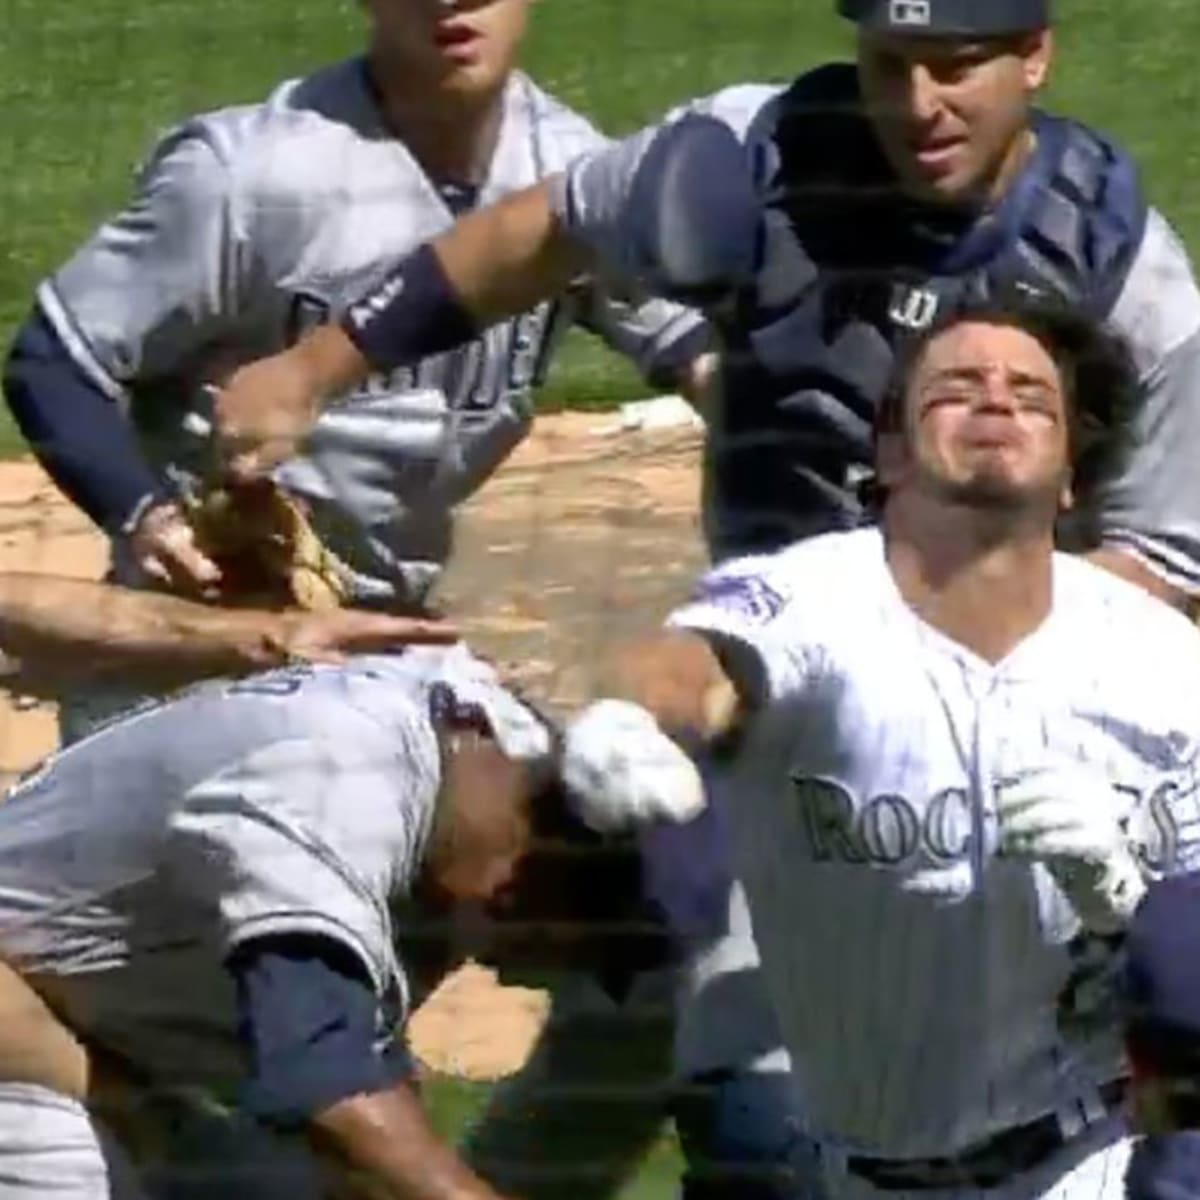 NY Mets players come together after Nolan Arenado fight